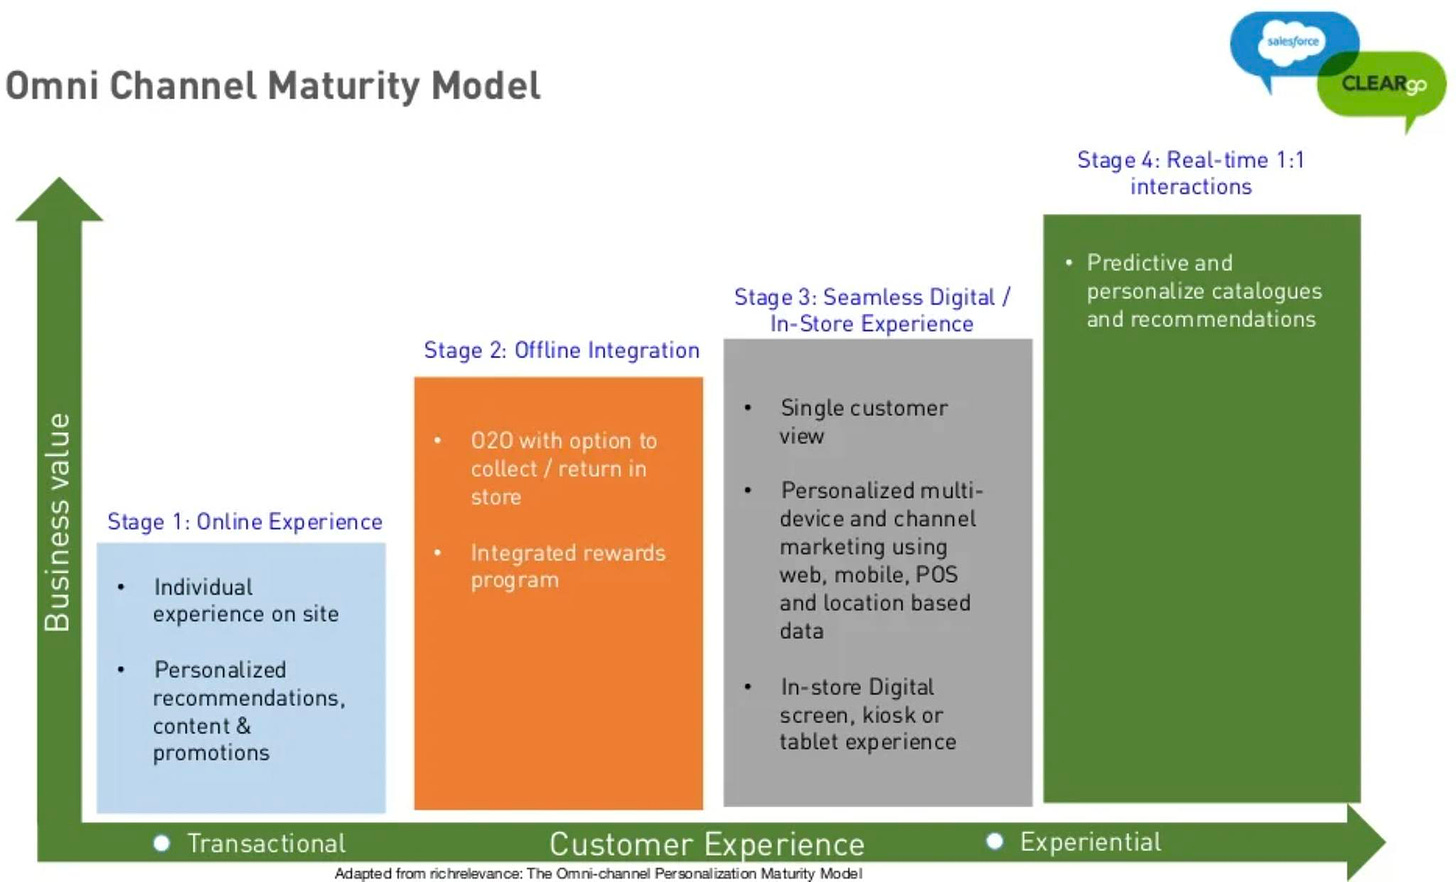 May be an image of text that says 'Omni Channel Maturity Model salesforce CLEARgo Stage 4: Real- time 1:1 interactions Stage 2: Offline Integration Stage 3: Seamless Digital/ In-Store Experience Predictive and personalize catalogues and recommendations 020 with option to collect/ return in store kalte LLNNS Stage 1: Online Experience Single customer view Individual experience on site Integrated rewards progr am Personalized multi- device and channel marketing using web, mobile, POS and location based data Personalized recommendations, content& promotions In-store Digital screen, kiosk tablet rience Transactional Adapted ichrelevance Customer Experience Omni- i-channel Personalization Maturity Model Experiential'